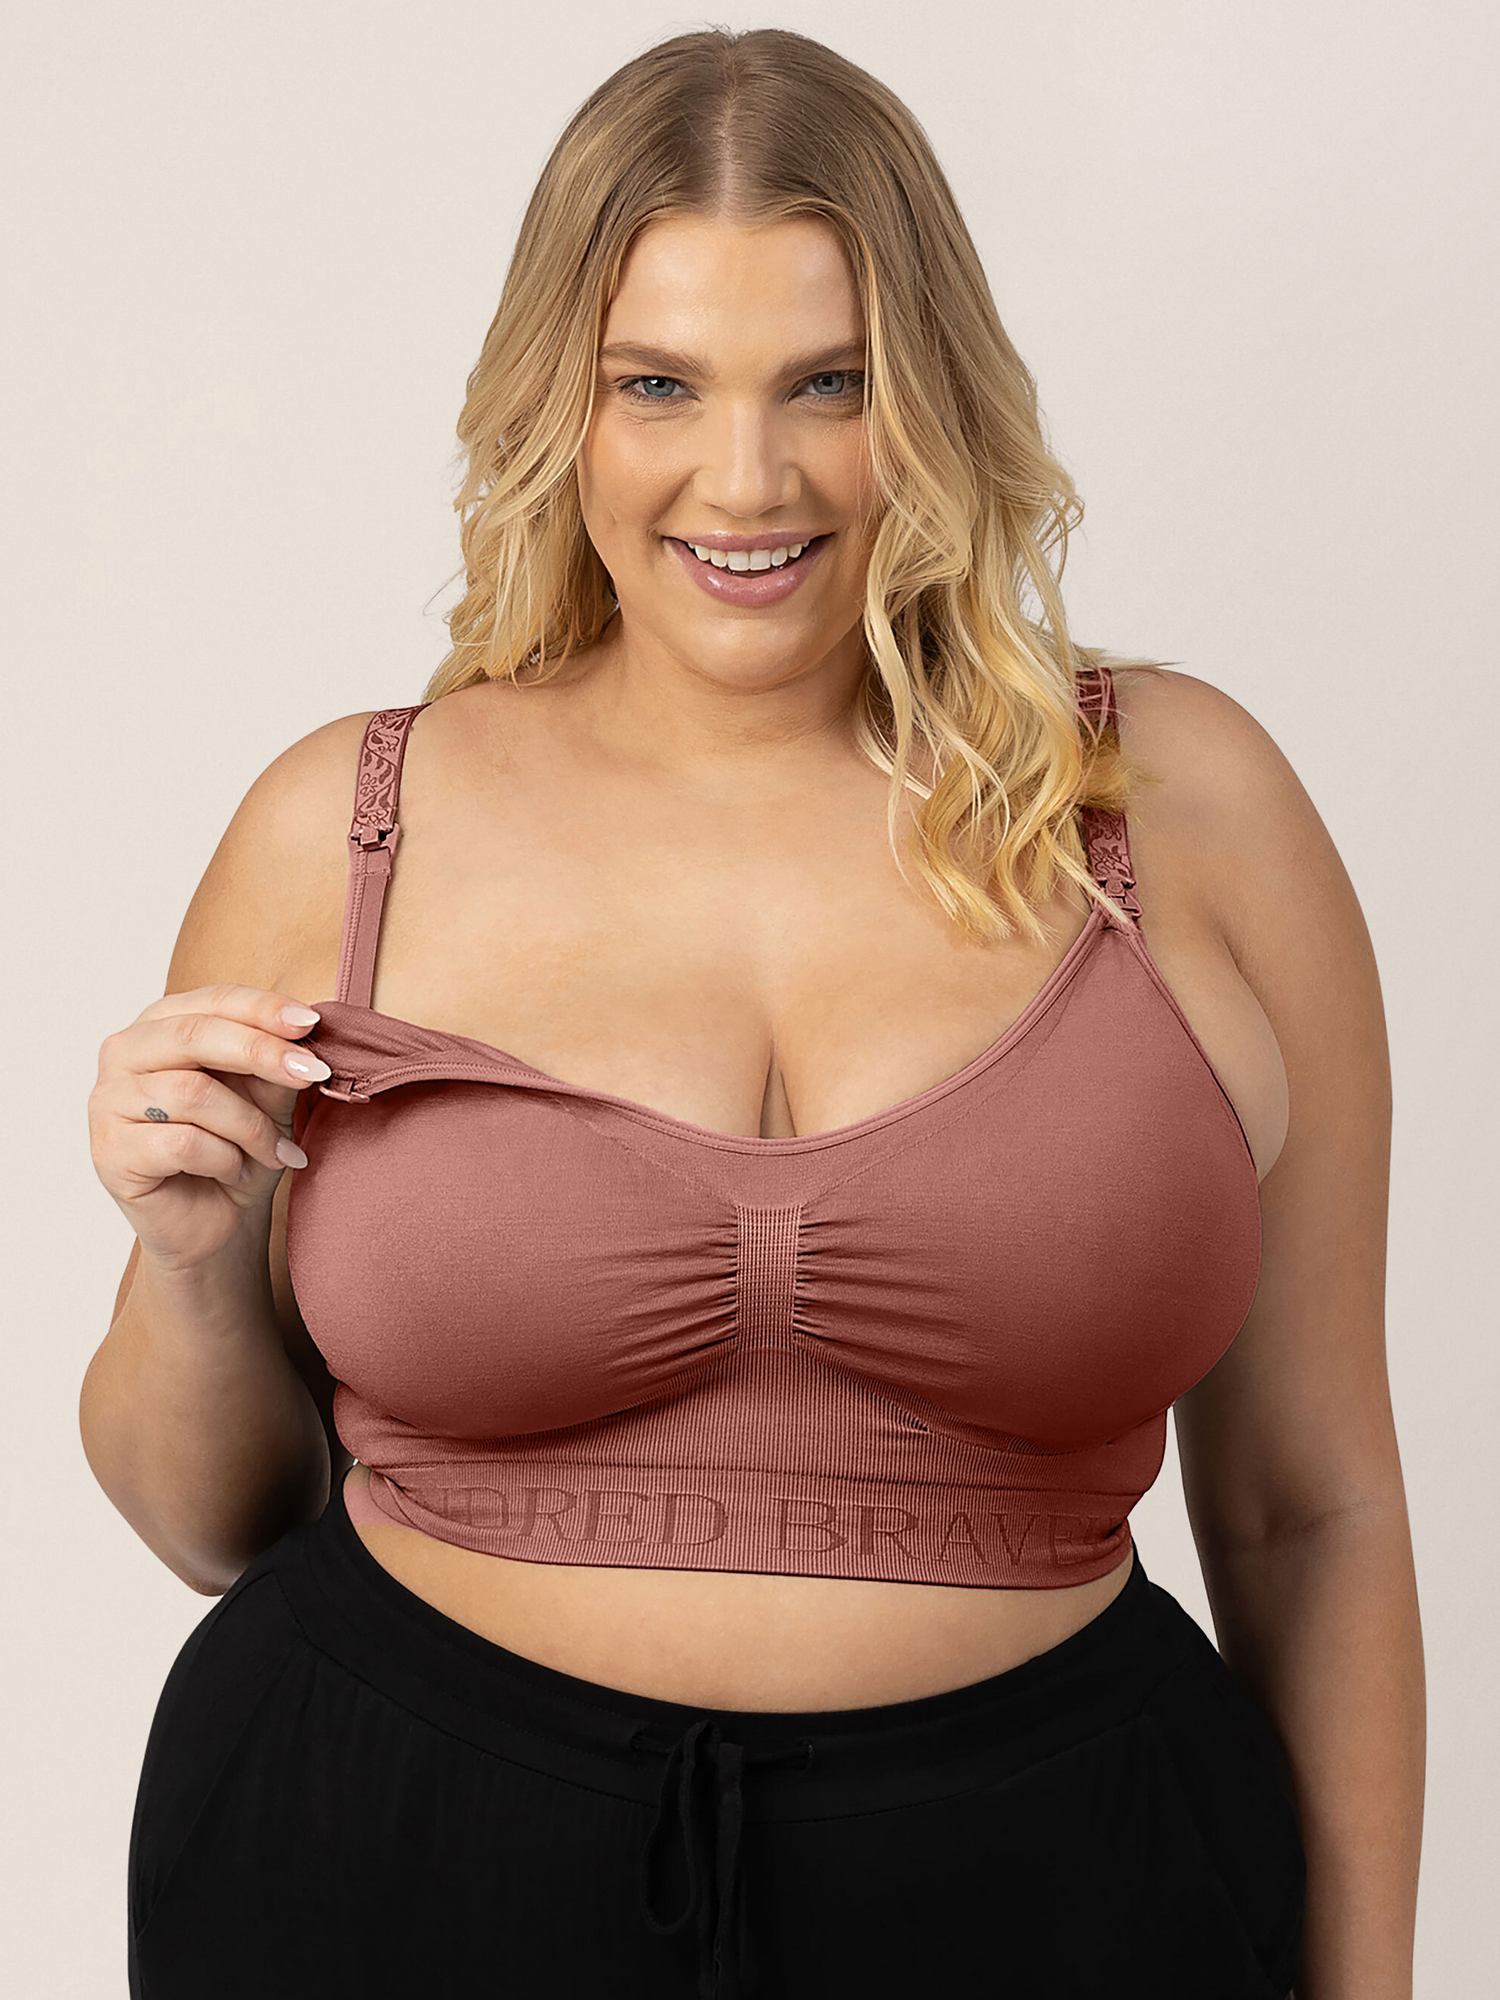 Closeup of a model wearing the Simply Sublime® Nursing Bra in Redwood showing the clip down nursing access.